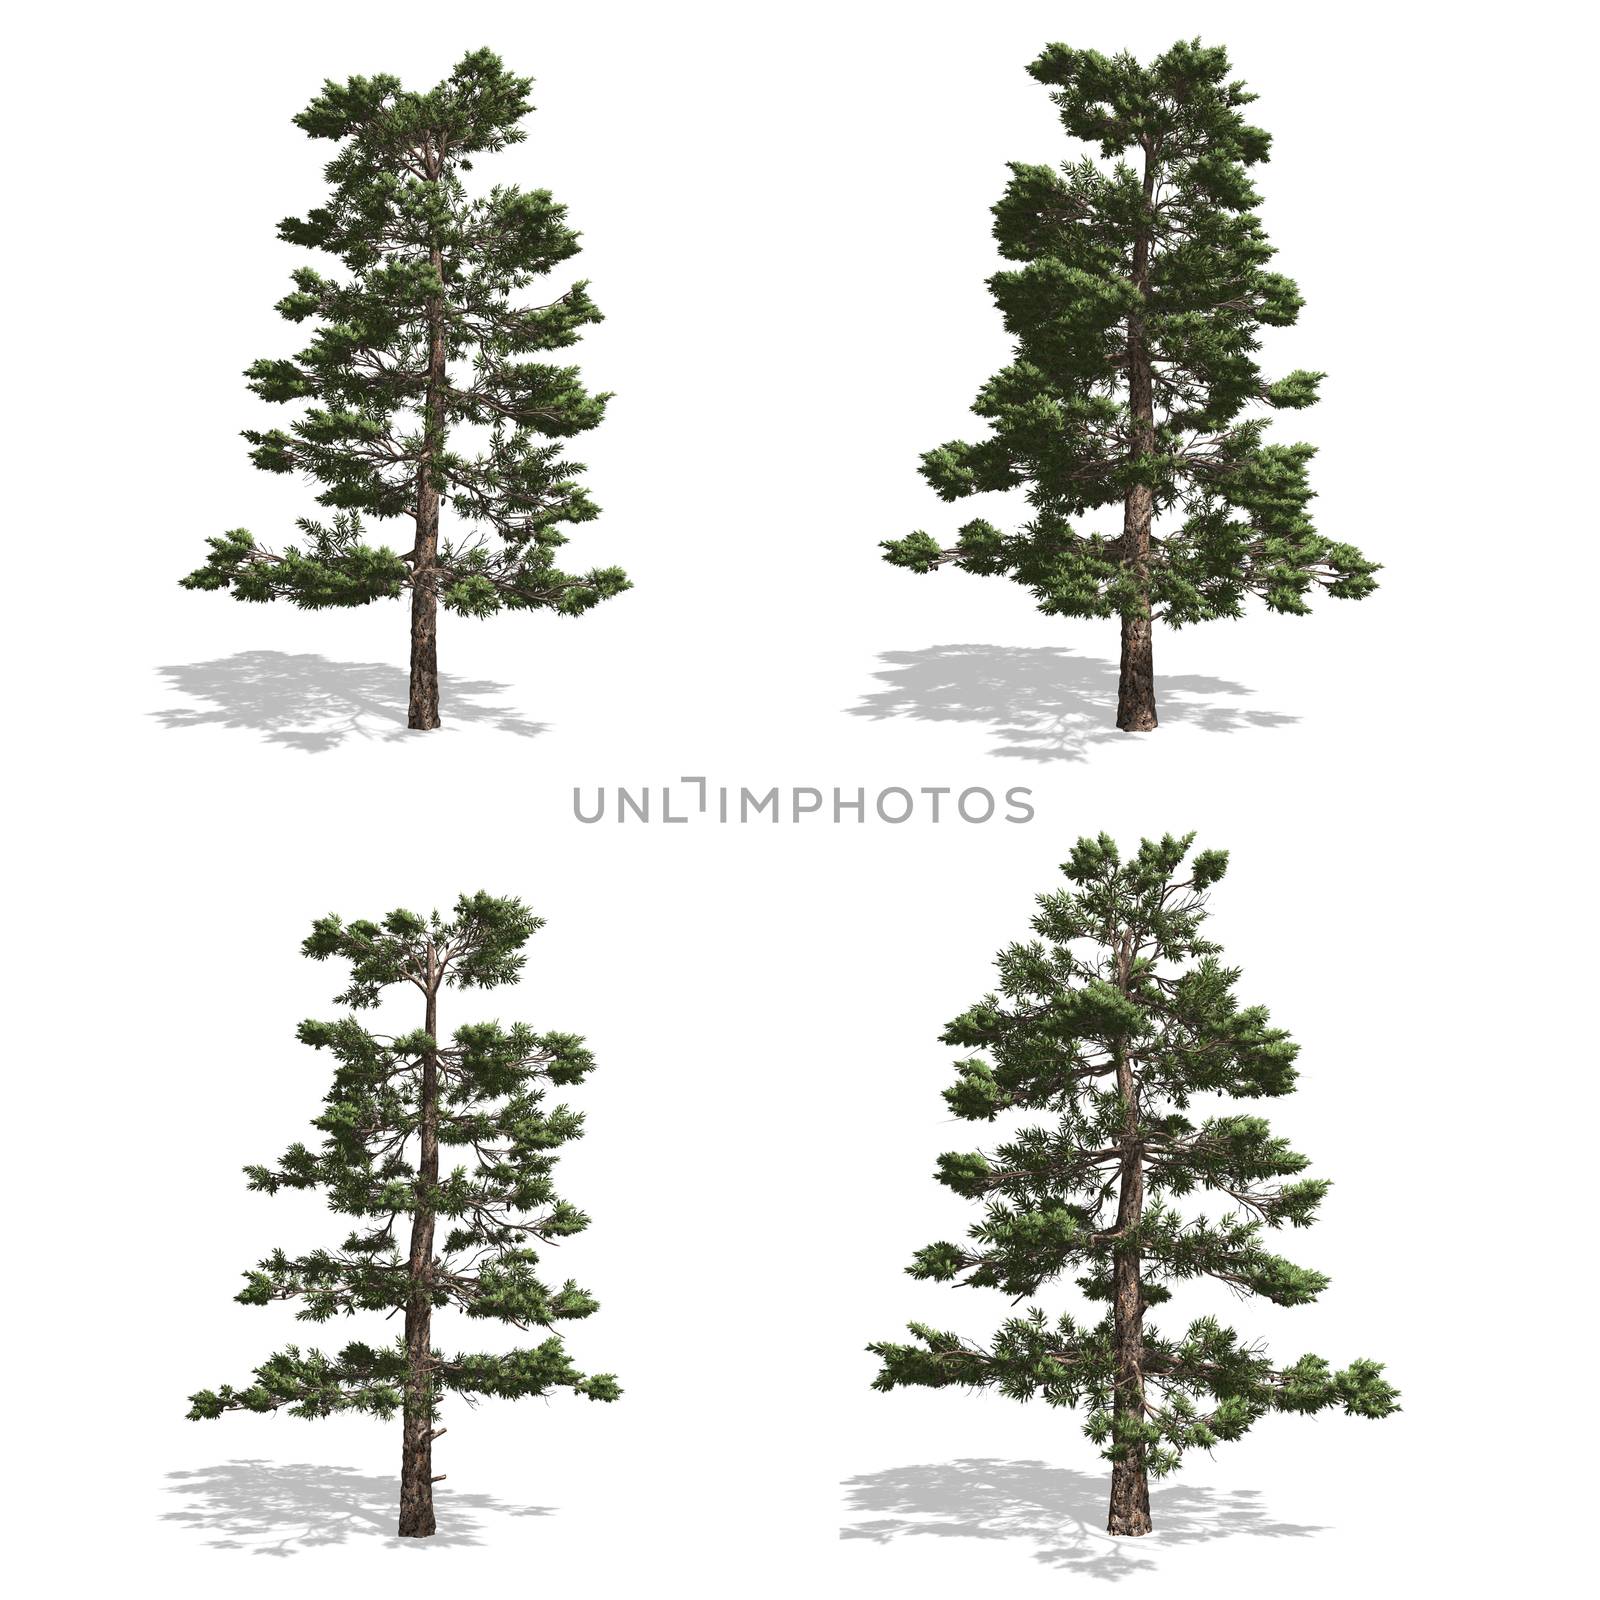 Pine trees, isolated on white background.